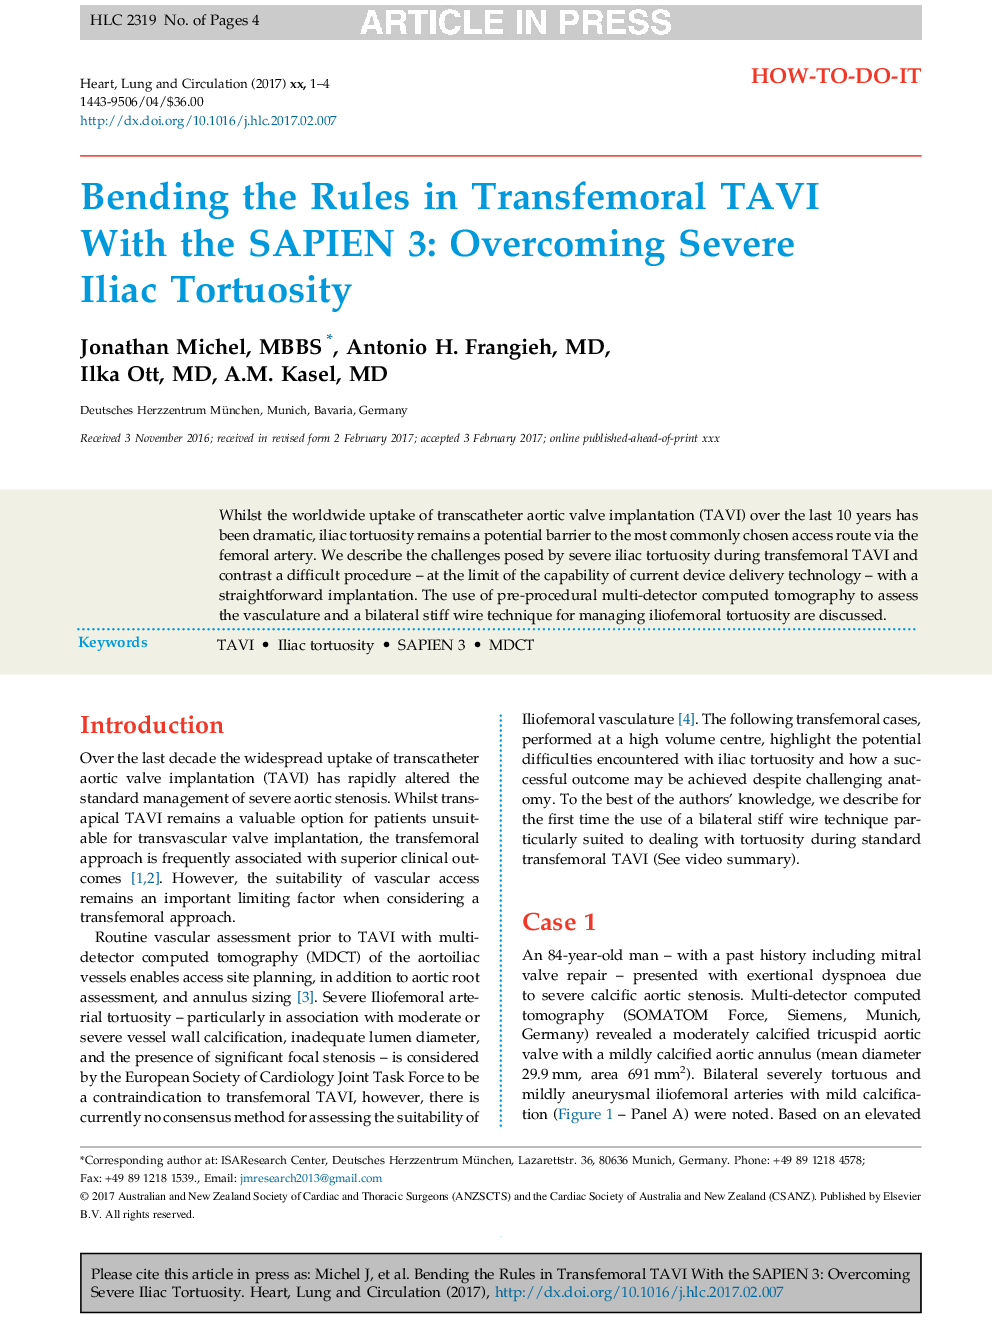 Bending the Rules in Transfemoral TAVI With the SAPIEN 3: Overcoming Severe Iliac Tortuosity